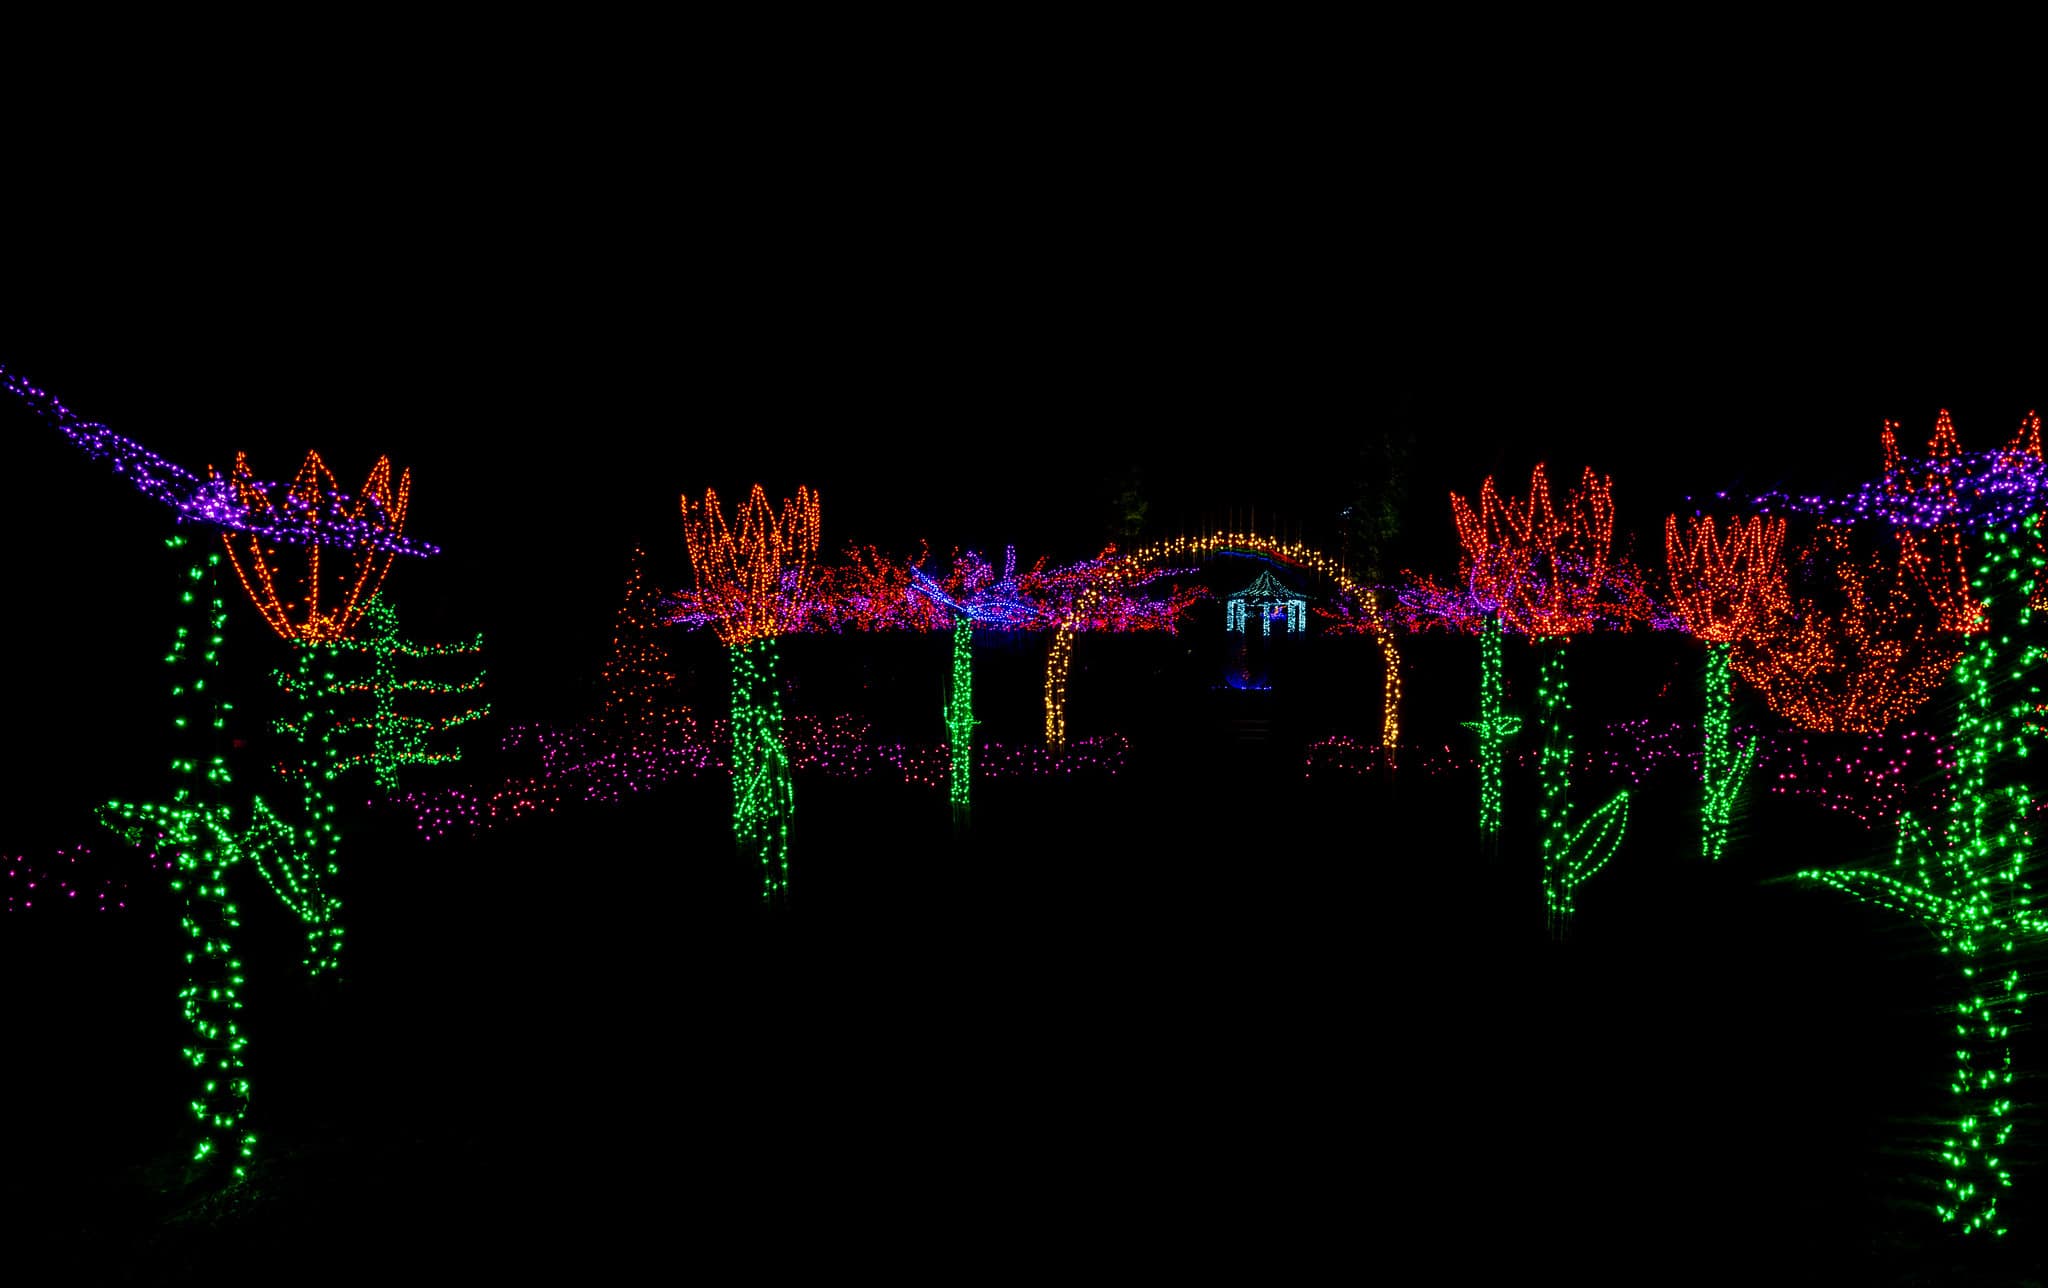 First Timers’ Guide to the Garden of Lights